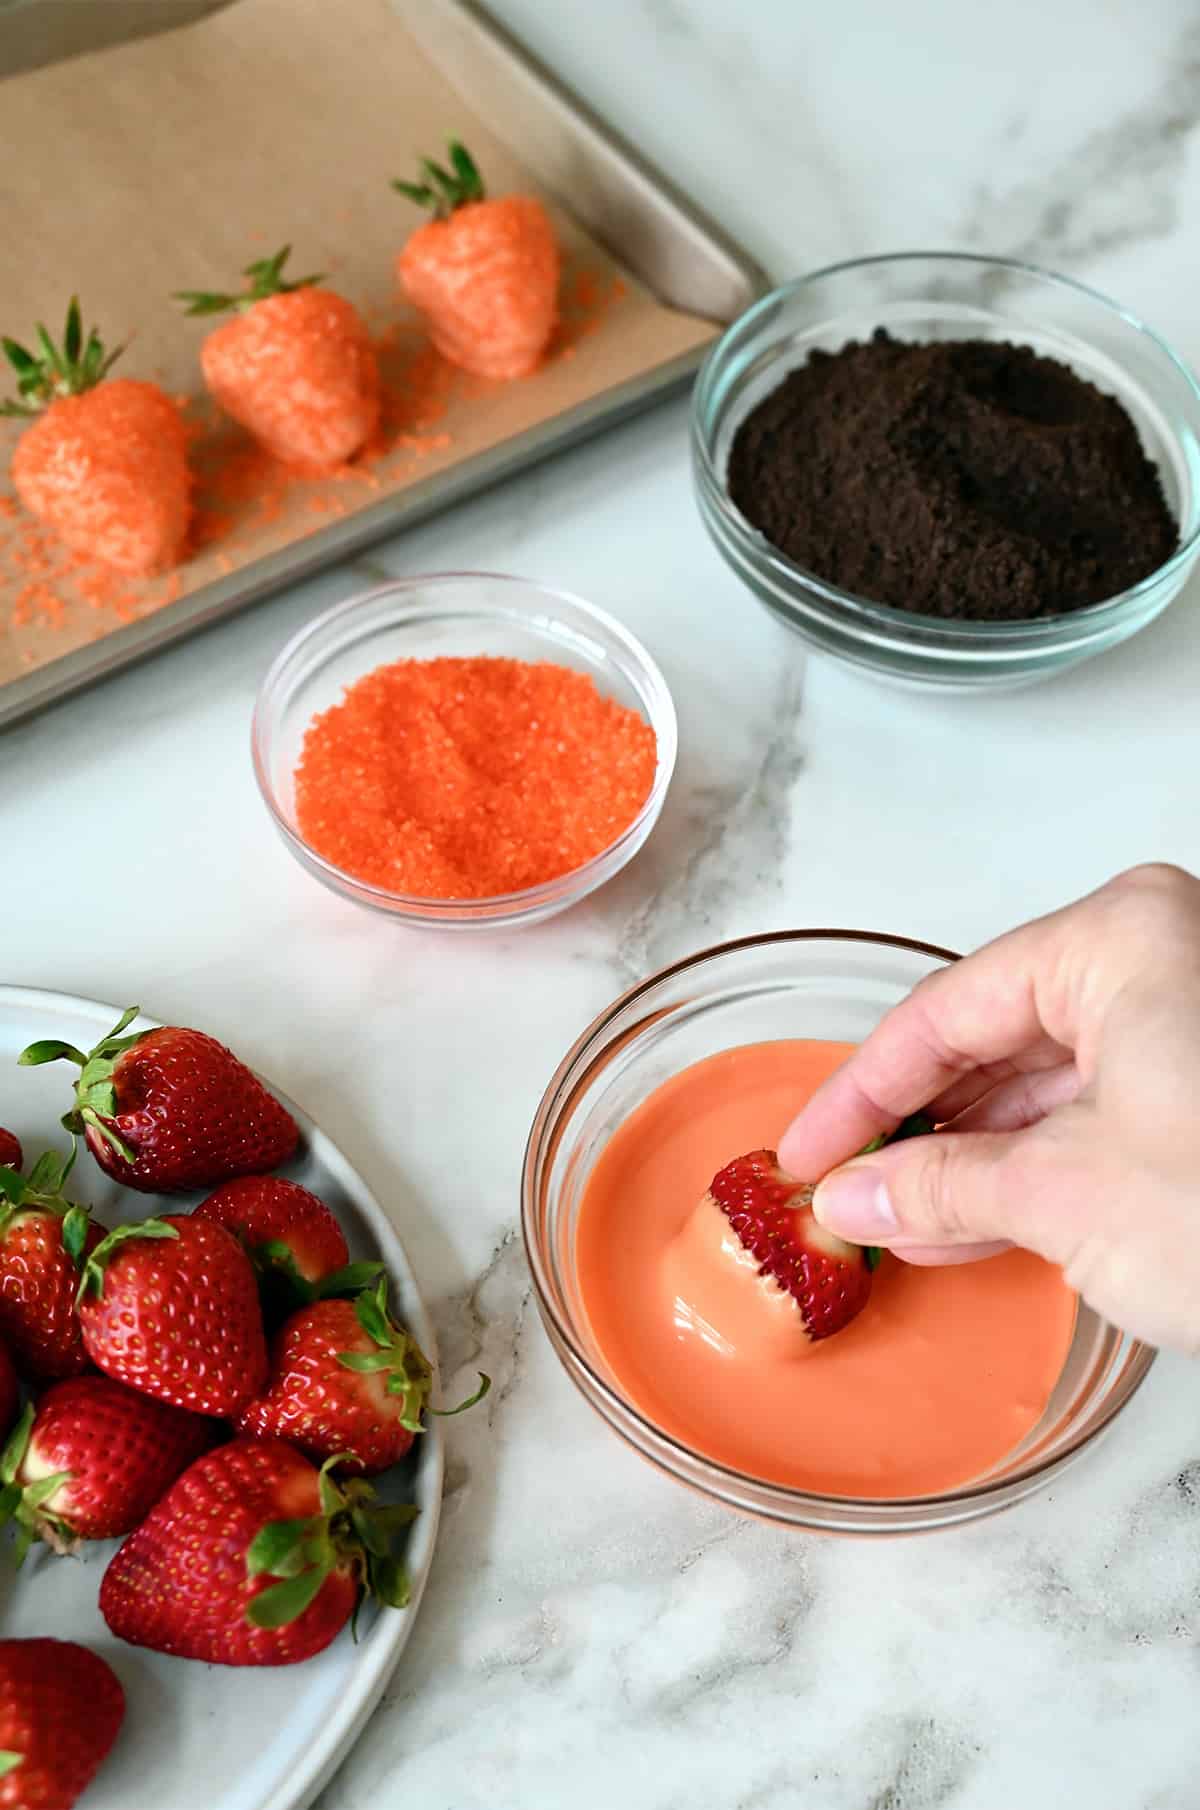 A person dipping a whole strawberry into melted orange candy melts. A plate of whole strawberries and bowls of orange sanding sugar and crushed chocolate wafers are scattered around.